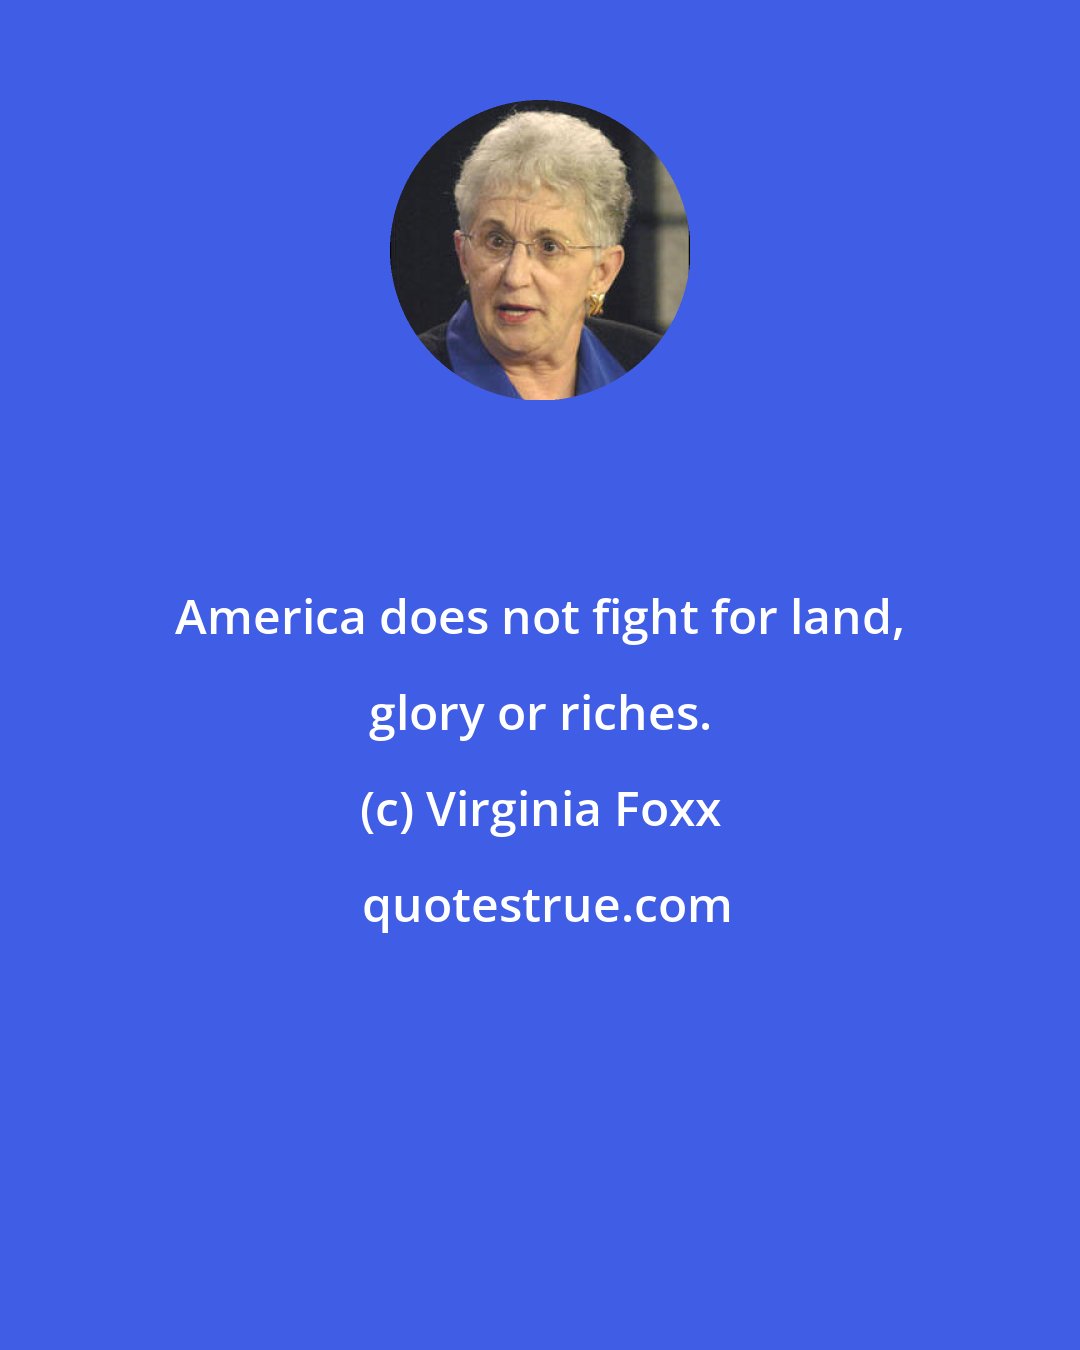 Virginia Foxx: America does not fight for land, glory or riches.